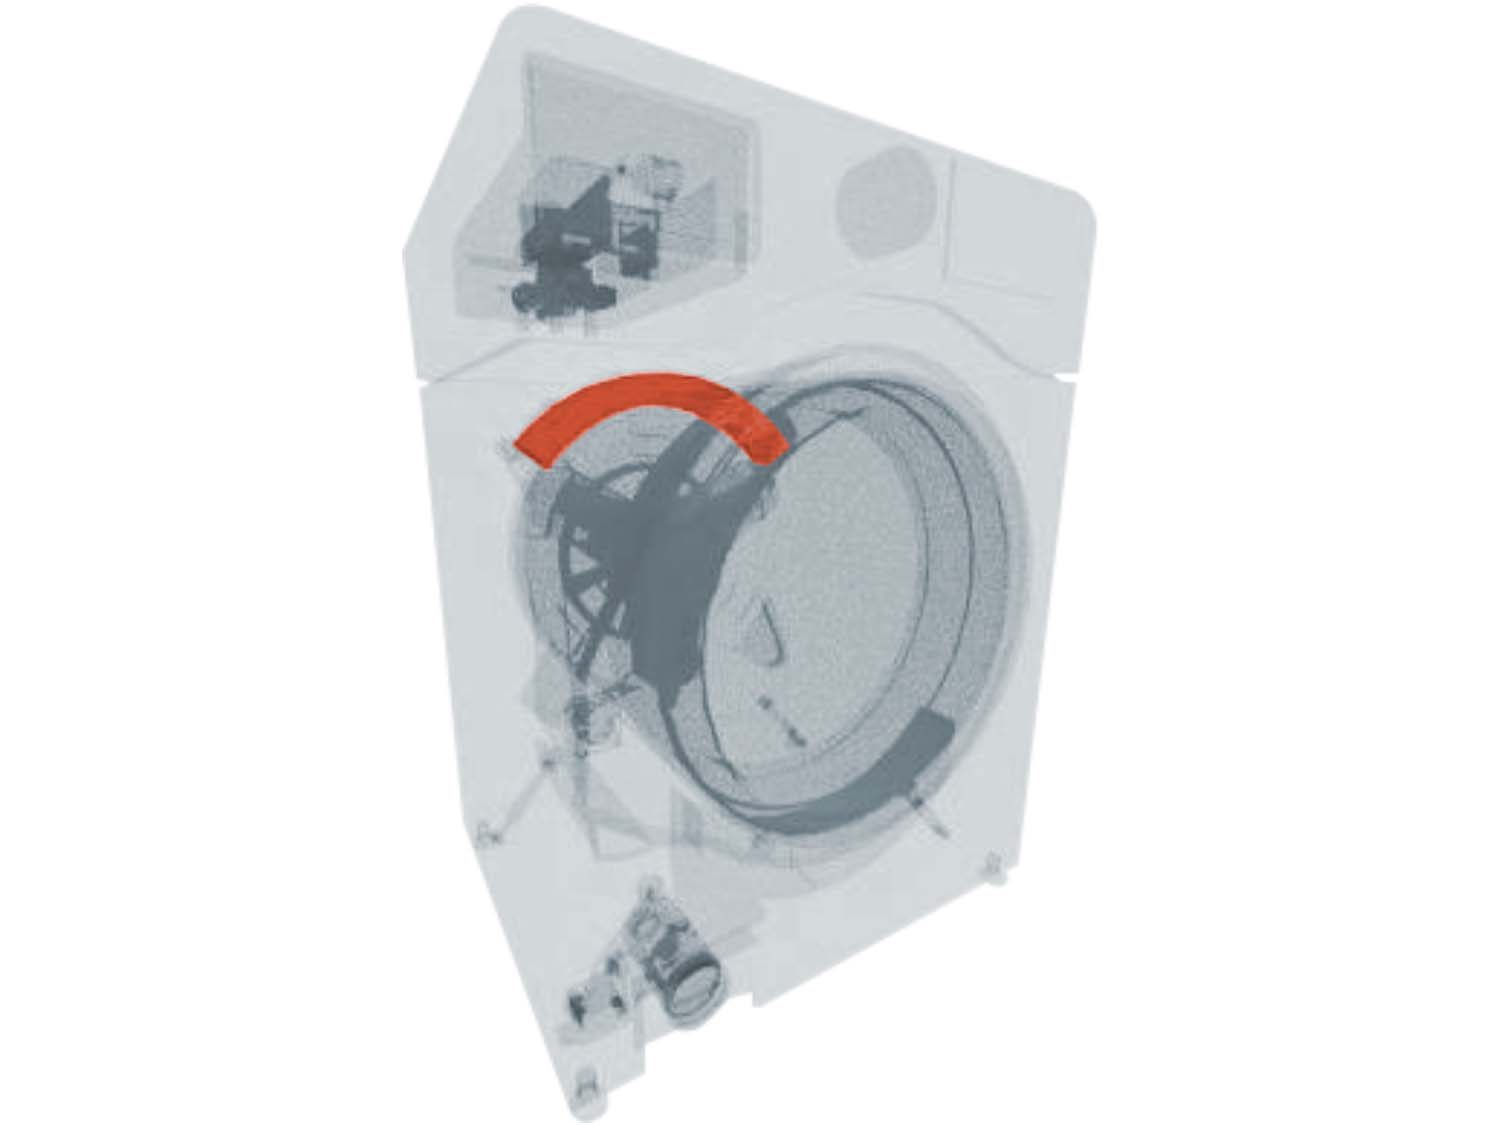 A 3D diagram showing the components of a front load washer and specifying the location of the counterweight